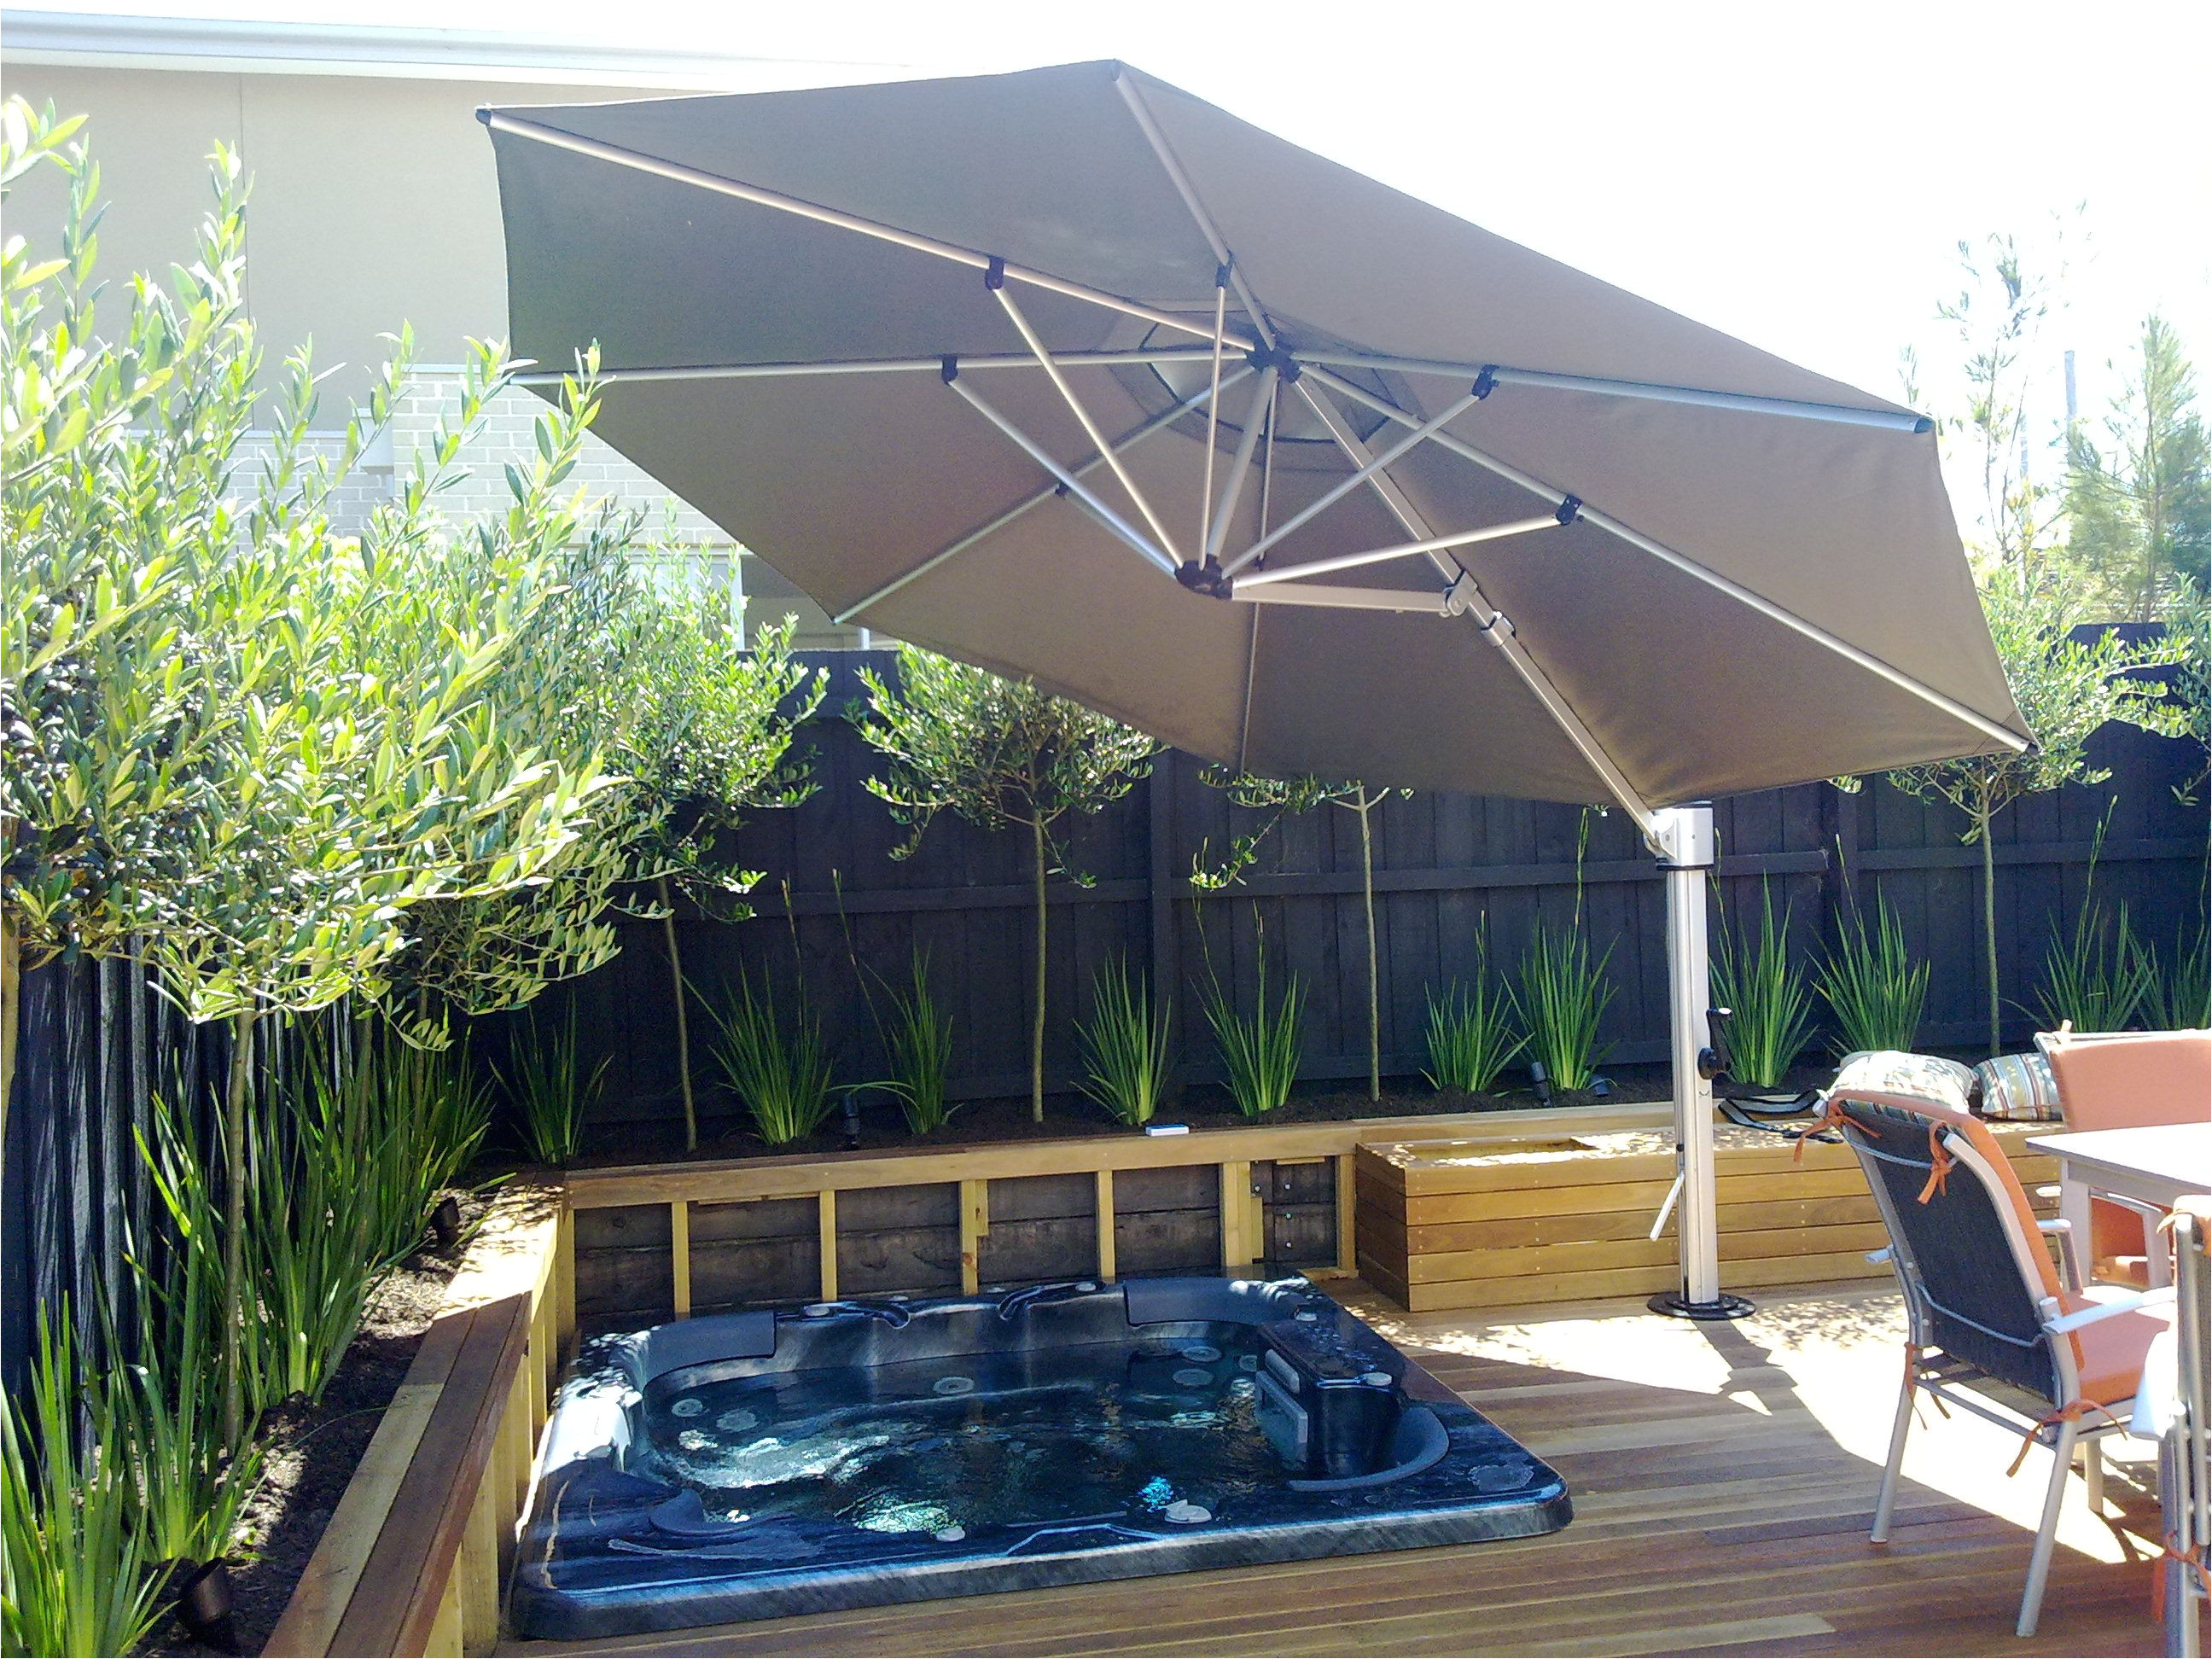 Cantilever Umbrella Deck Mount the Perfect Shade for A Pool Spa or Dining area is An Eclipse